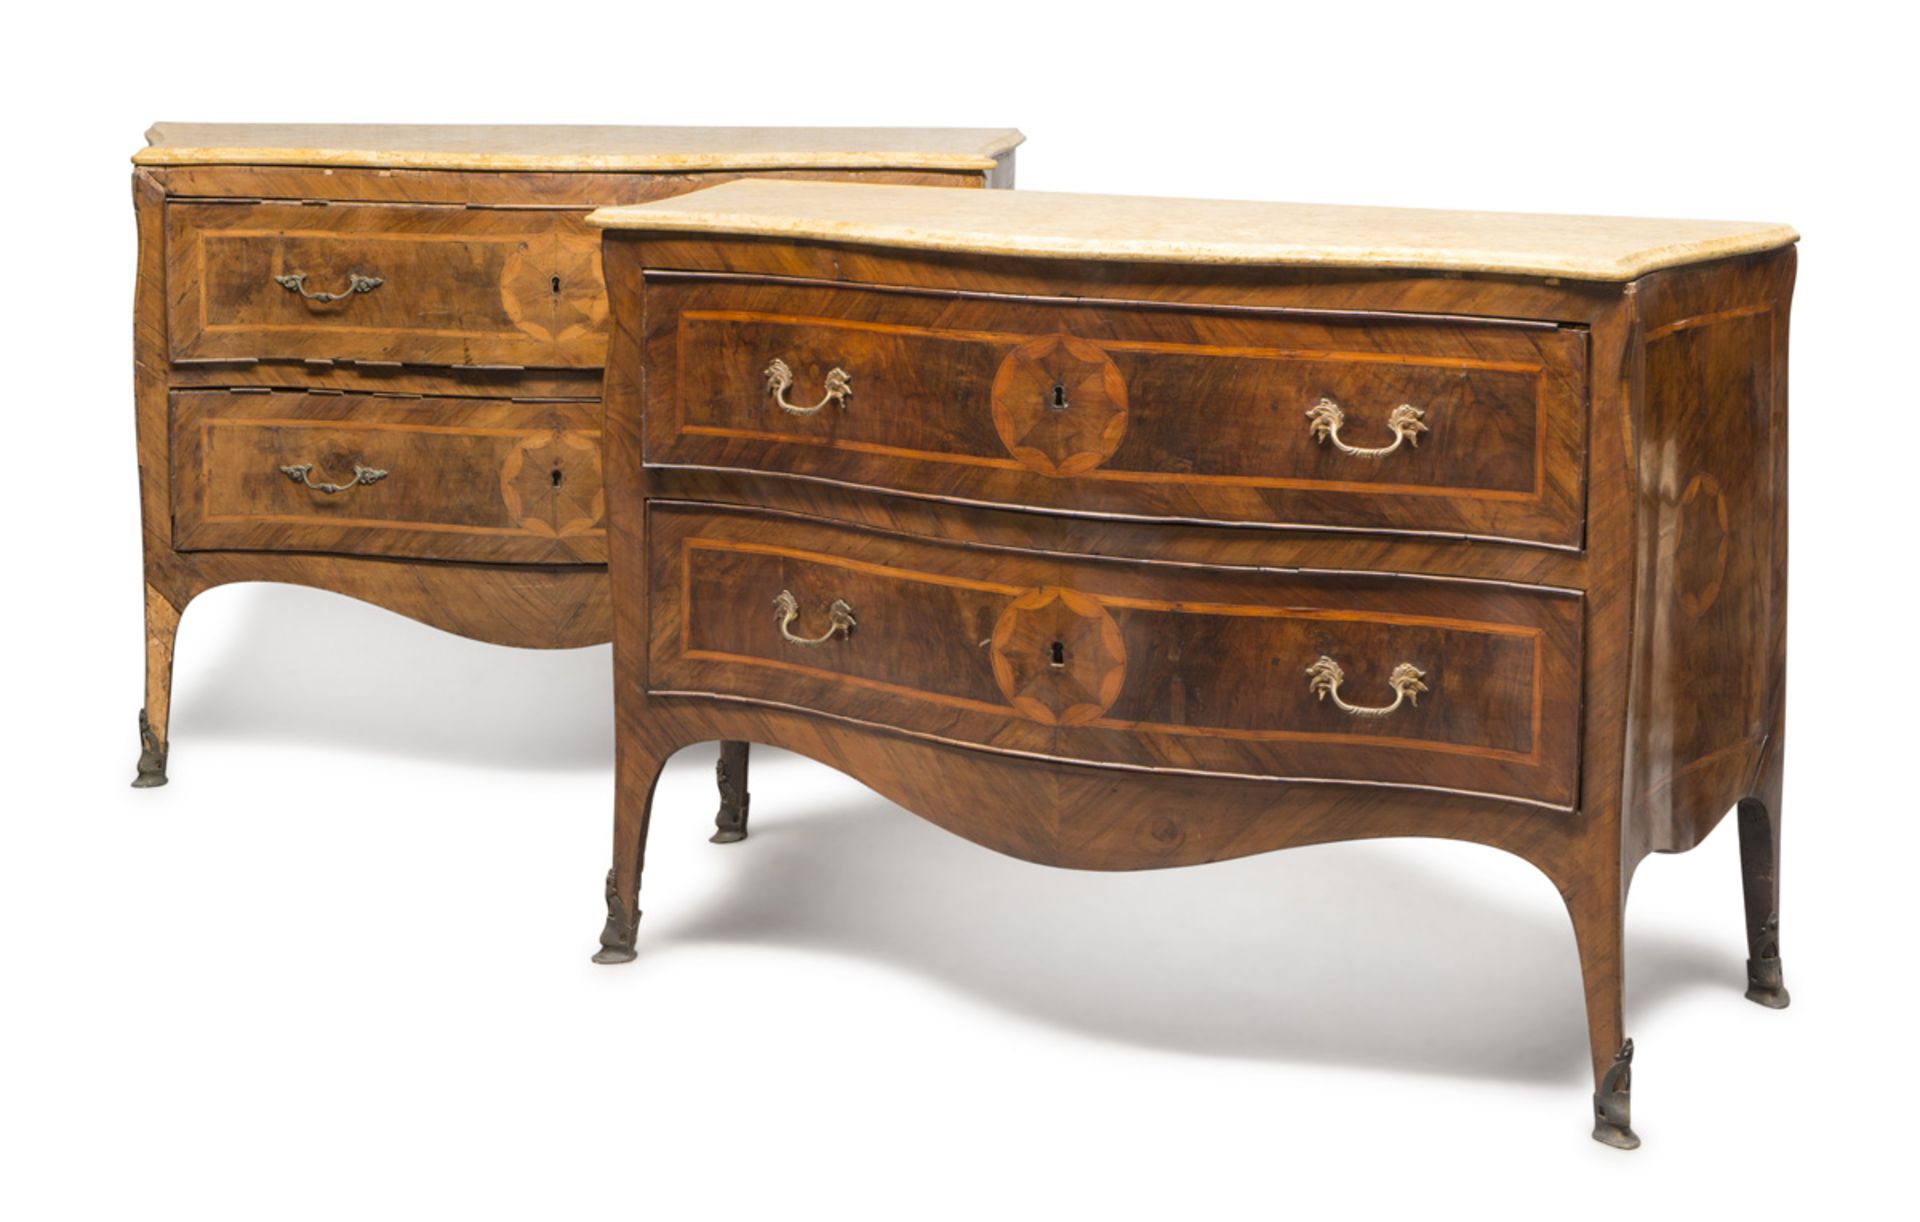 BEAUTIFUL PAIR OF COMMODES IN WALNUT AND BRIAR WALNUT NAPLES 18TH CENTURY